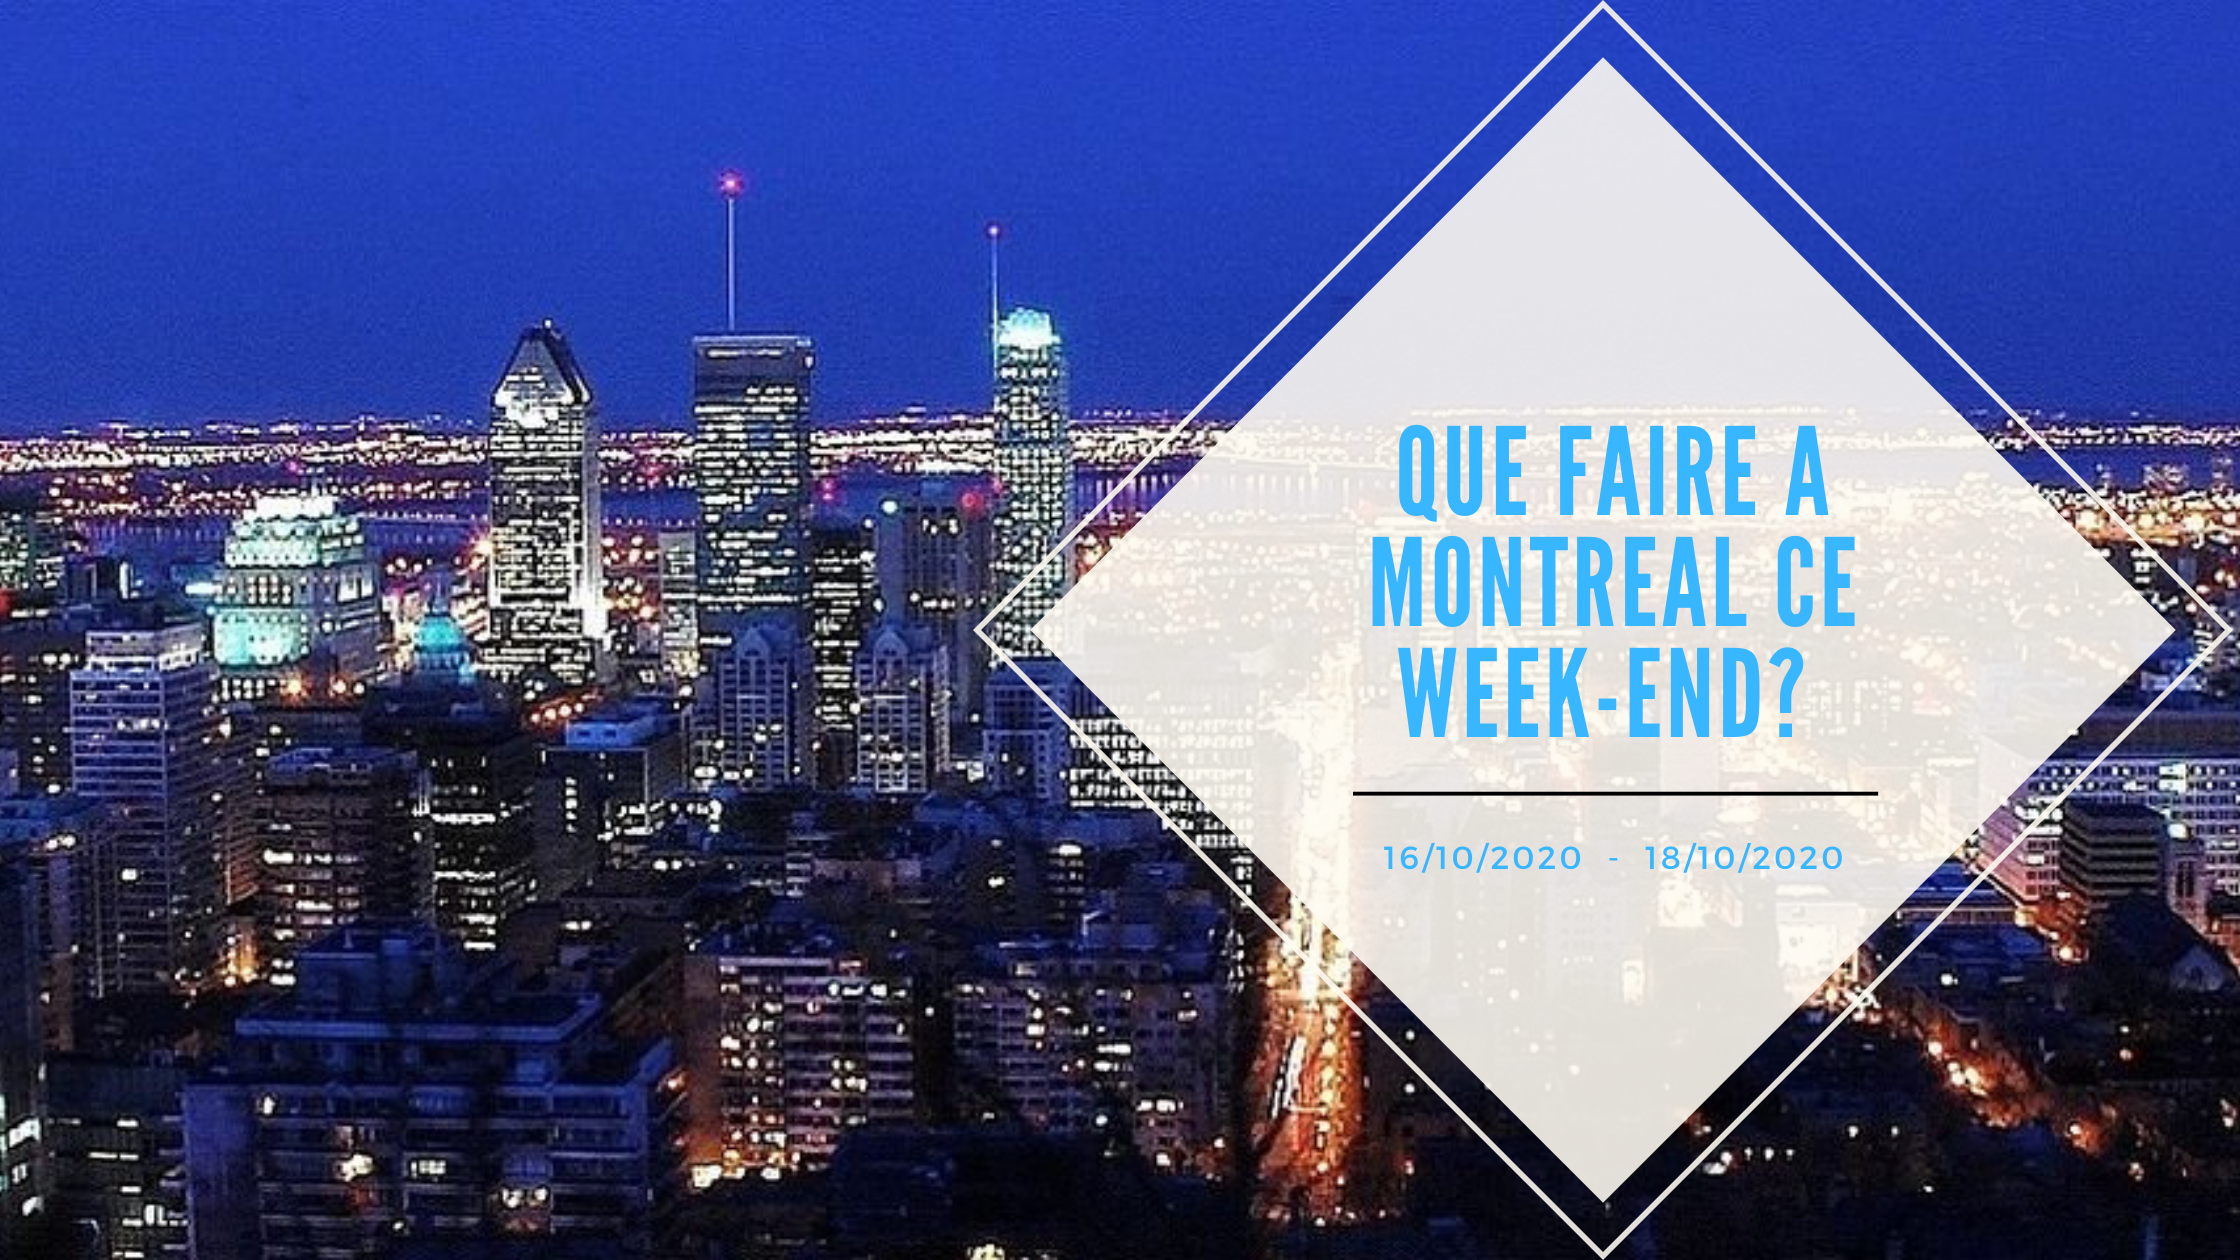 What to do this weekend in Montreal on October 16, 17 and 18, 2020?